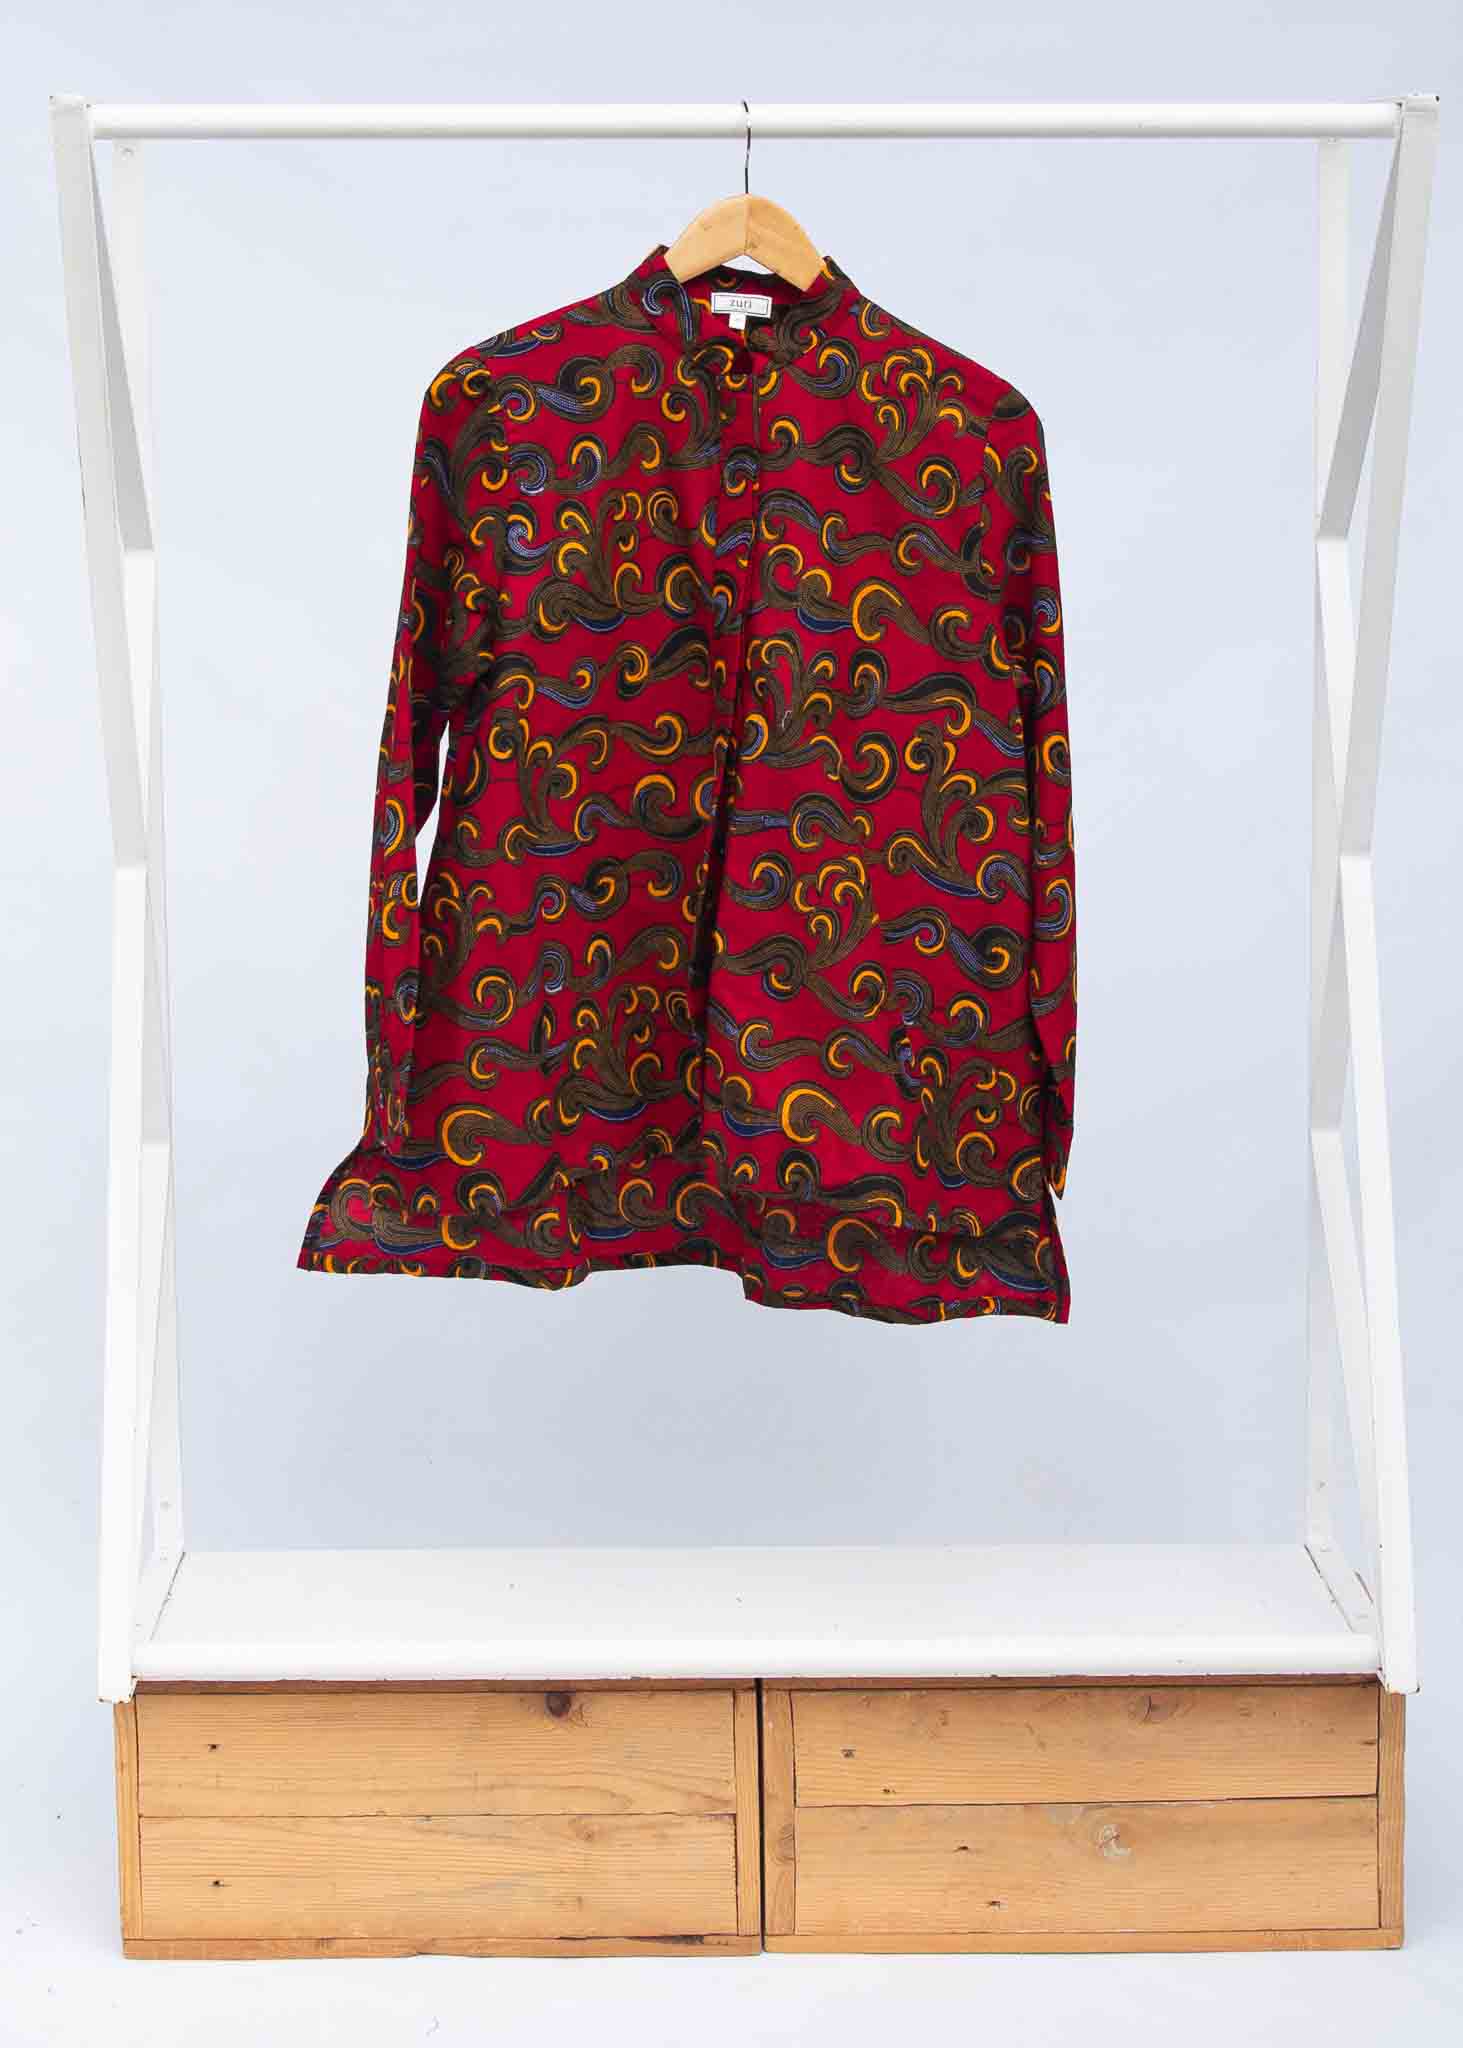 Display of red long sleeved blouse with yellow swirls.